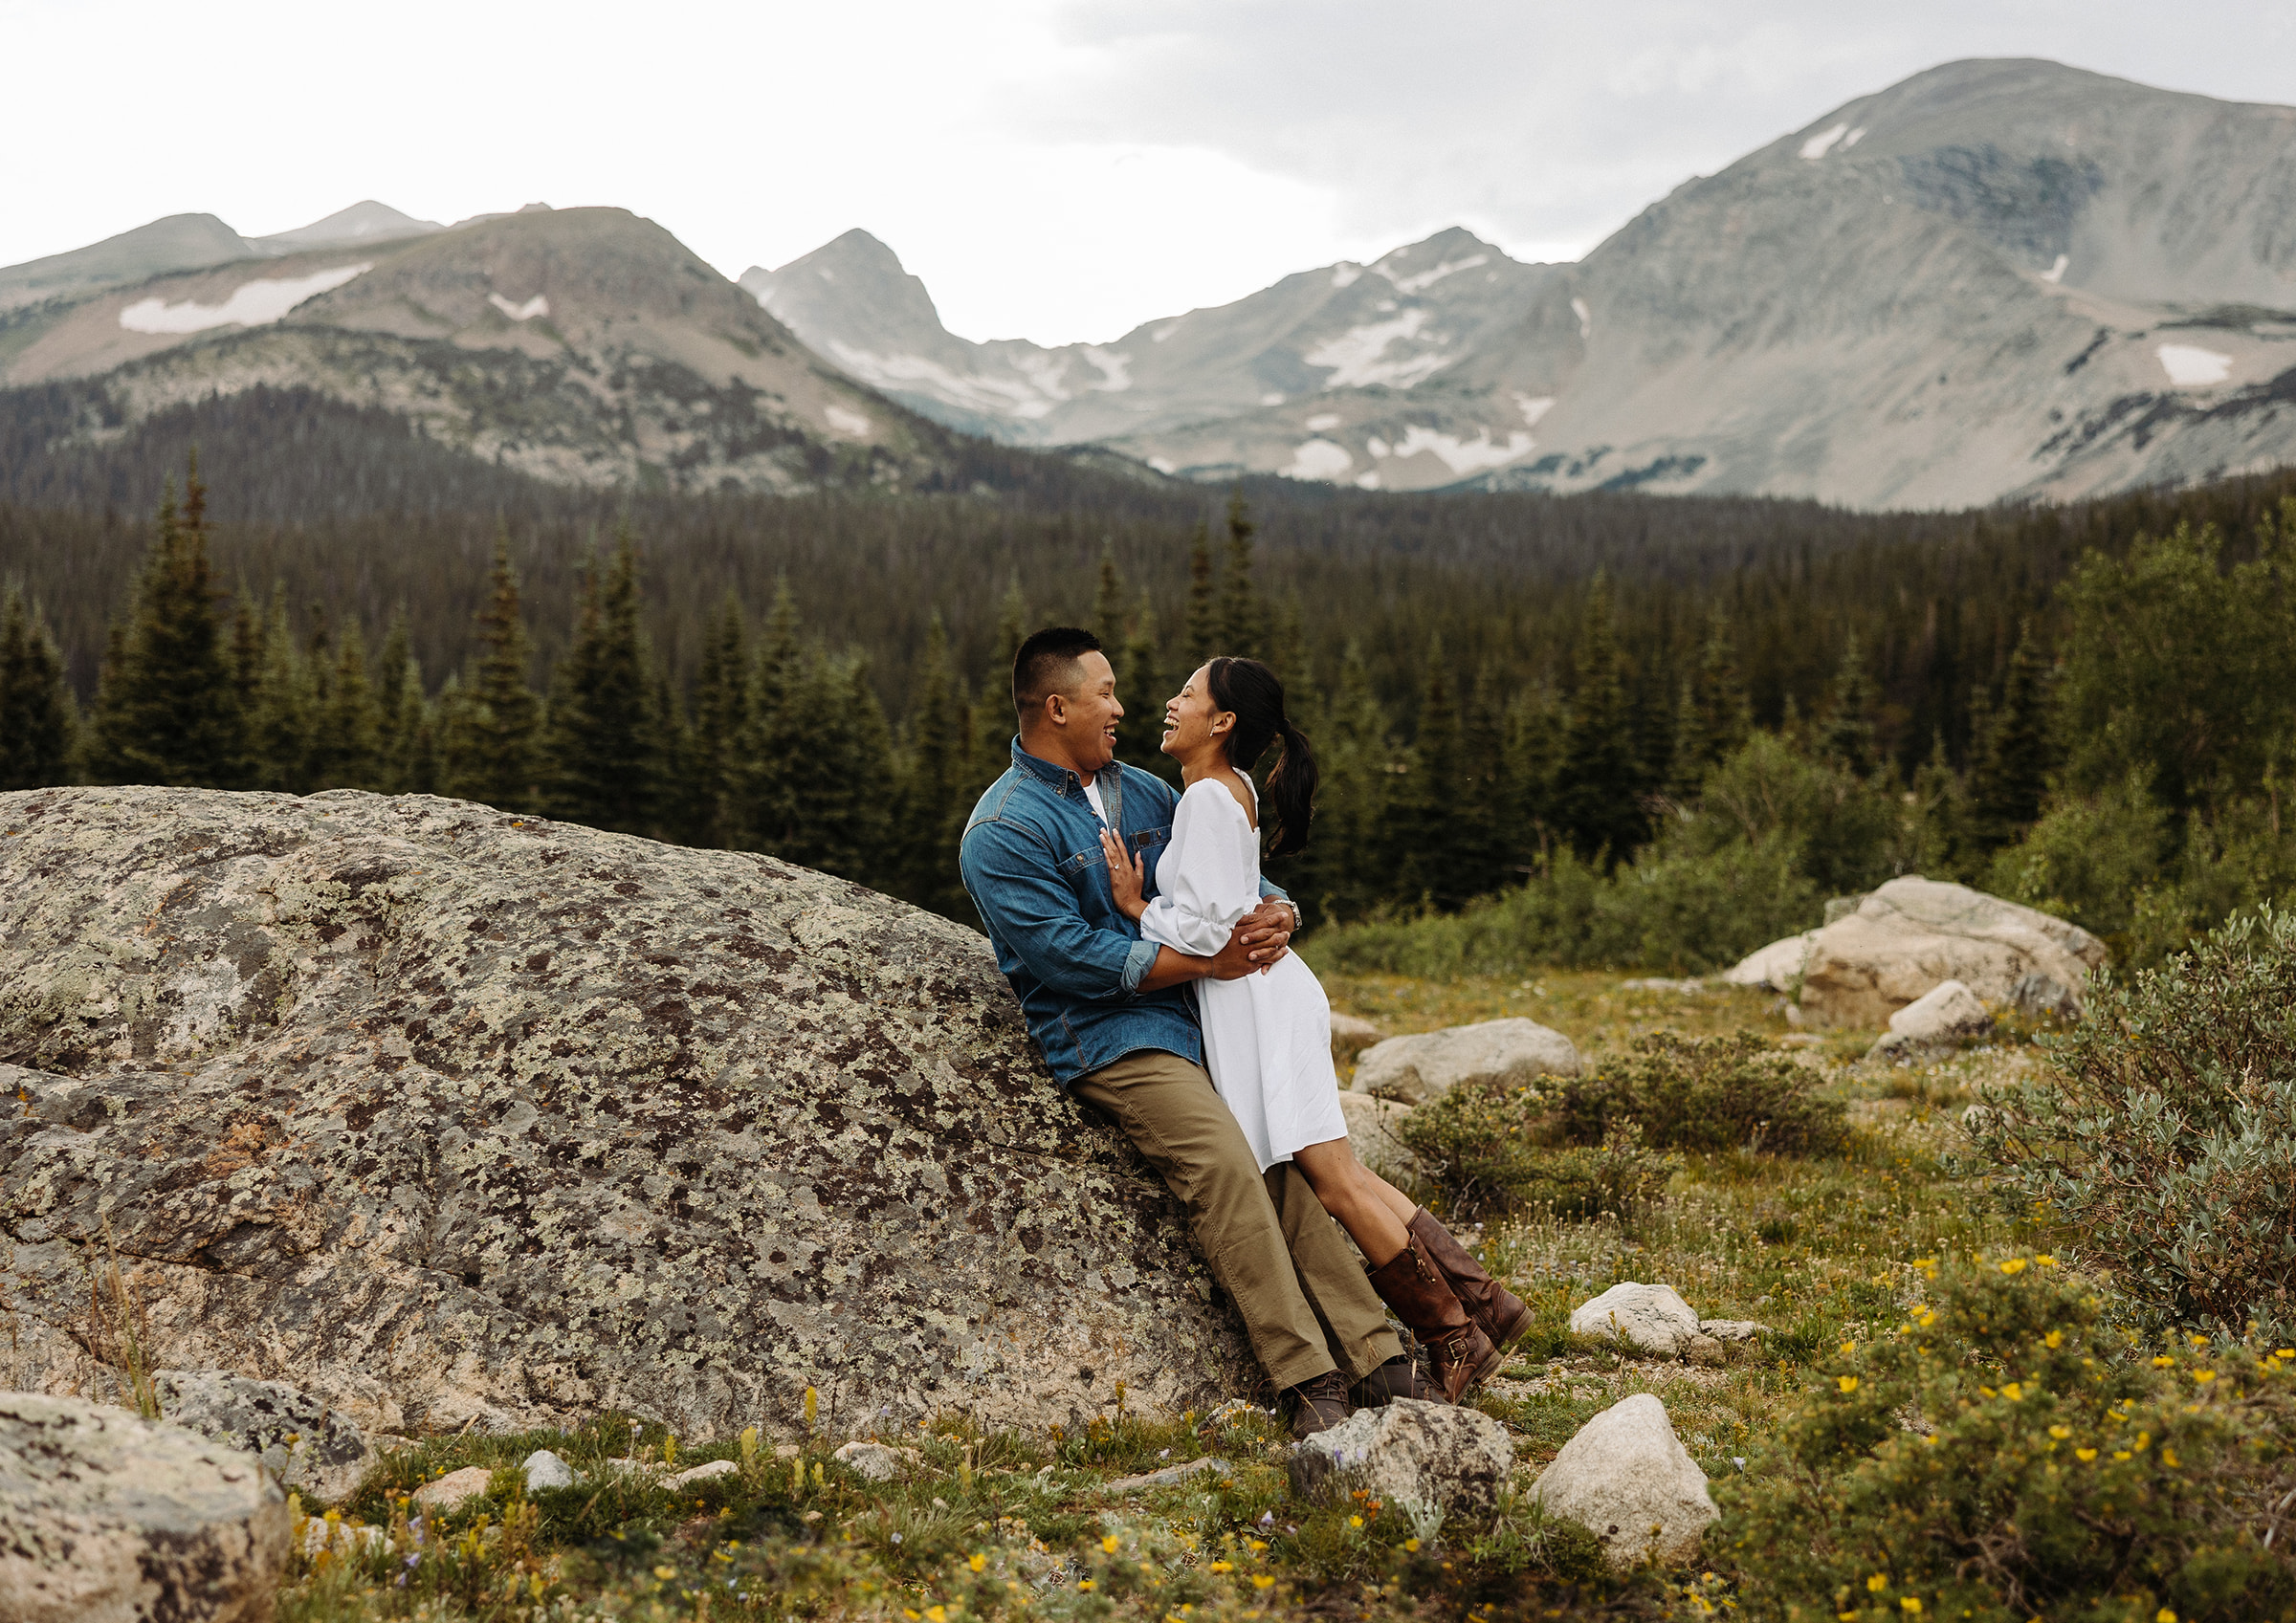 The two embrace on a huge rock on the forrest clearing with the mountains taking up the whole background behind them.